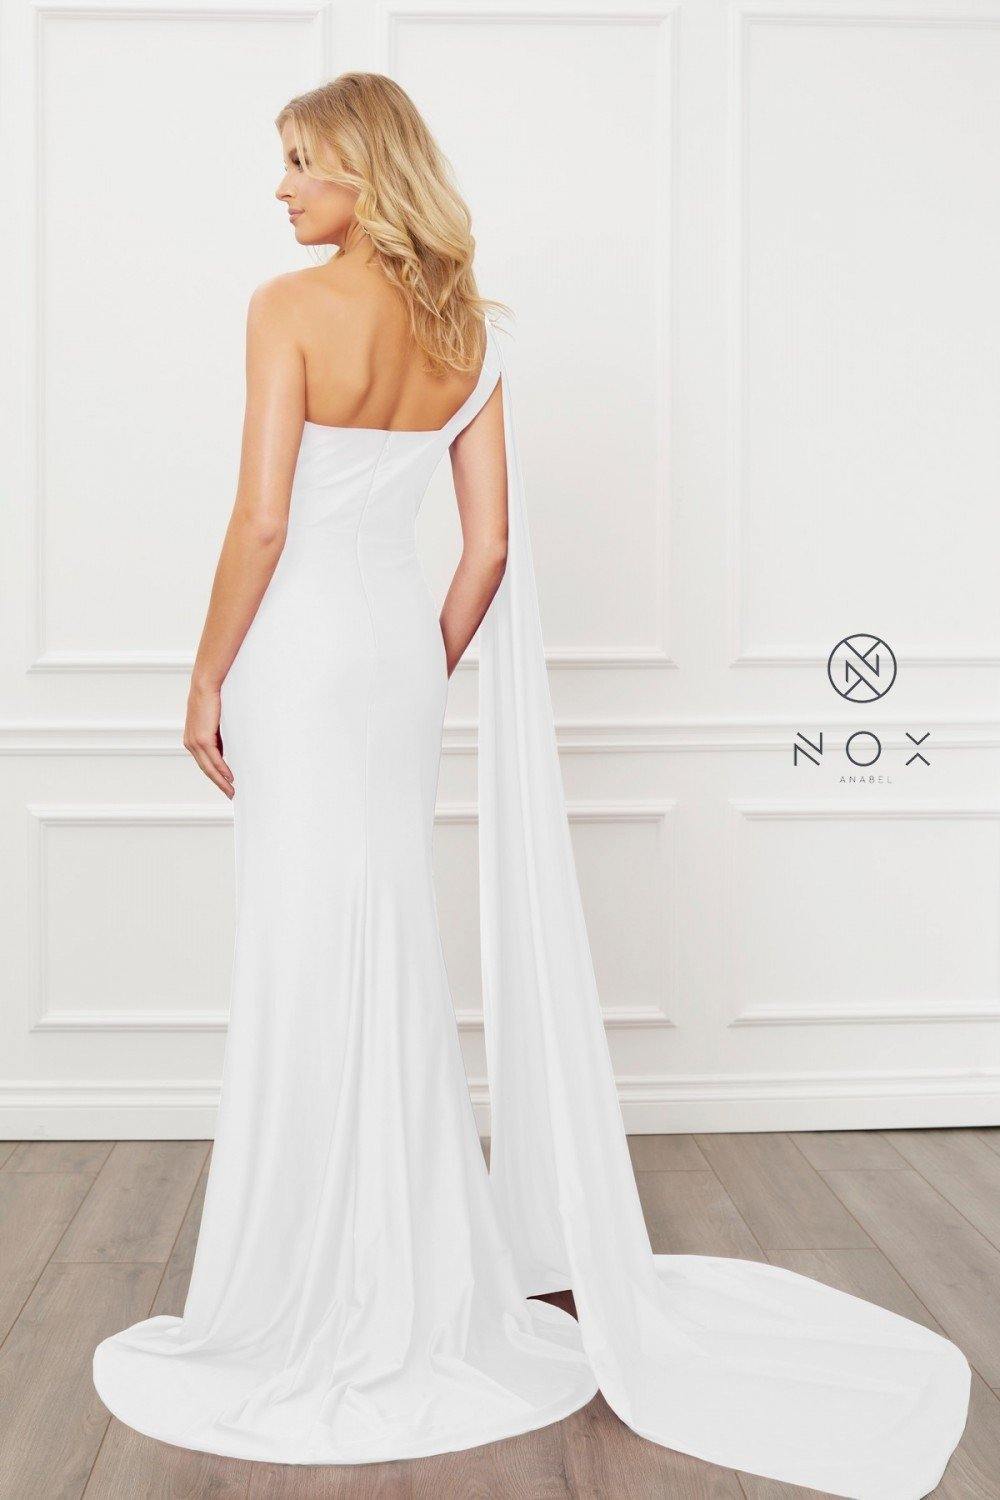 Long White Gown Wedding Dress - The Dress Outlet